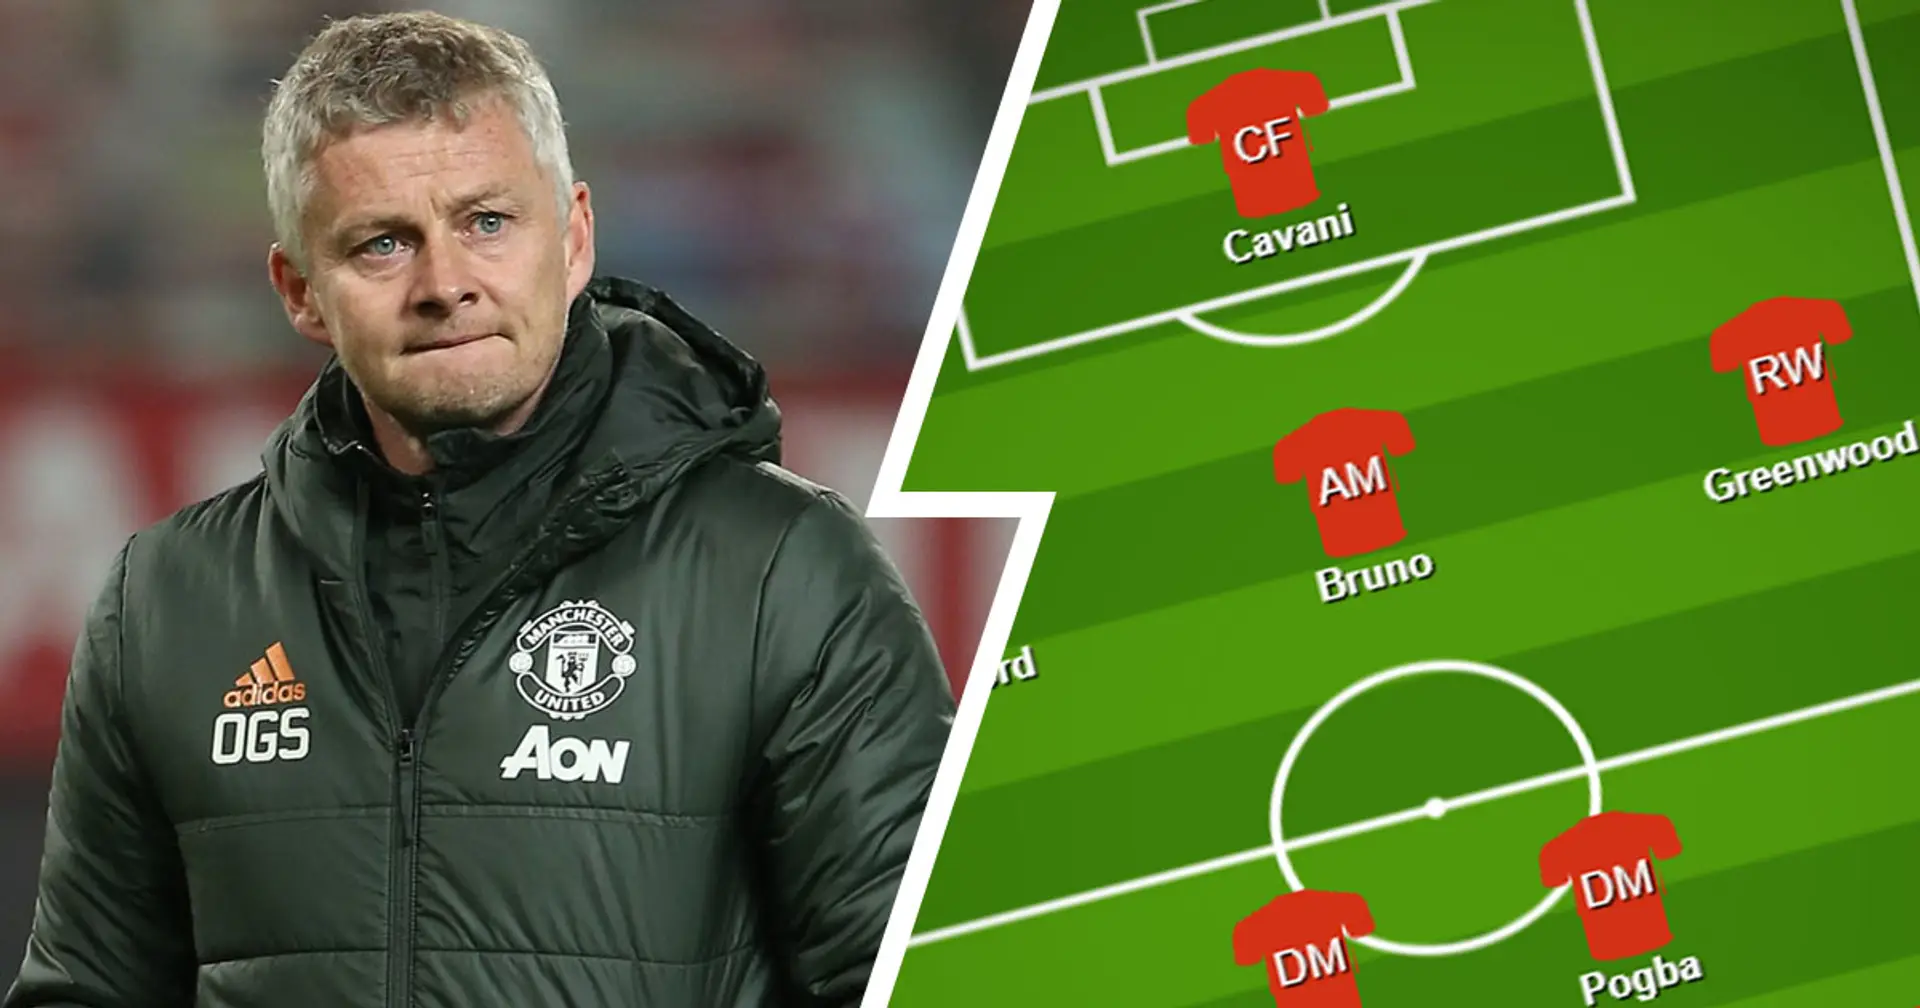 Tuanzebe to start? Select your favourite United XI vs Fulham from 2 options